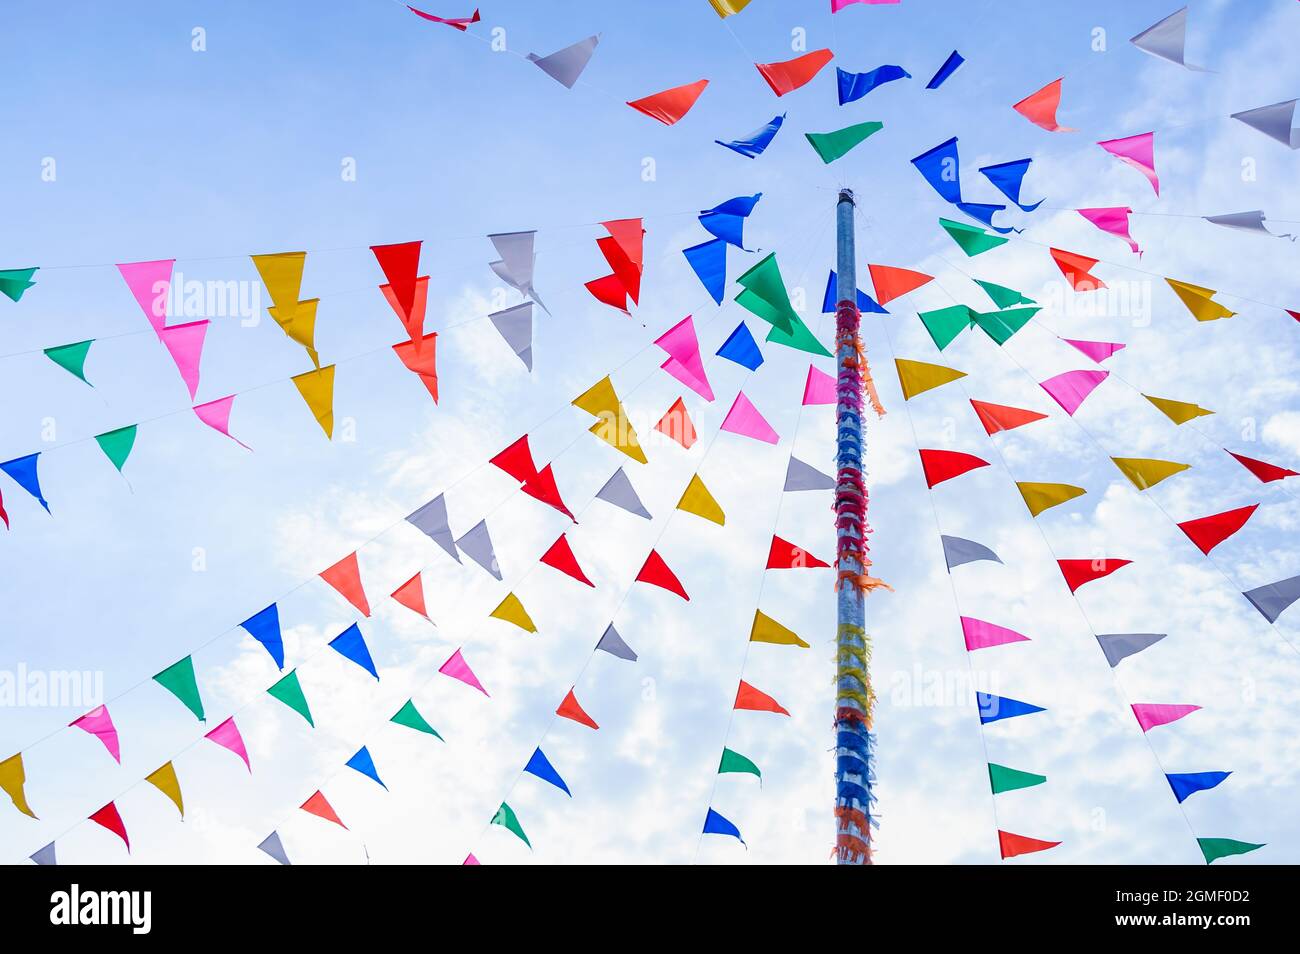 vivid color of Thai's style fancy party flag strips decoration on a fancy still pole with blue sky and white cloud in background Stock Photo